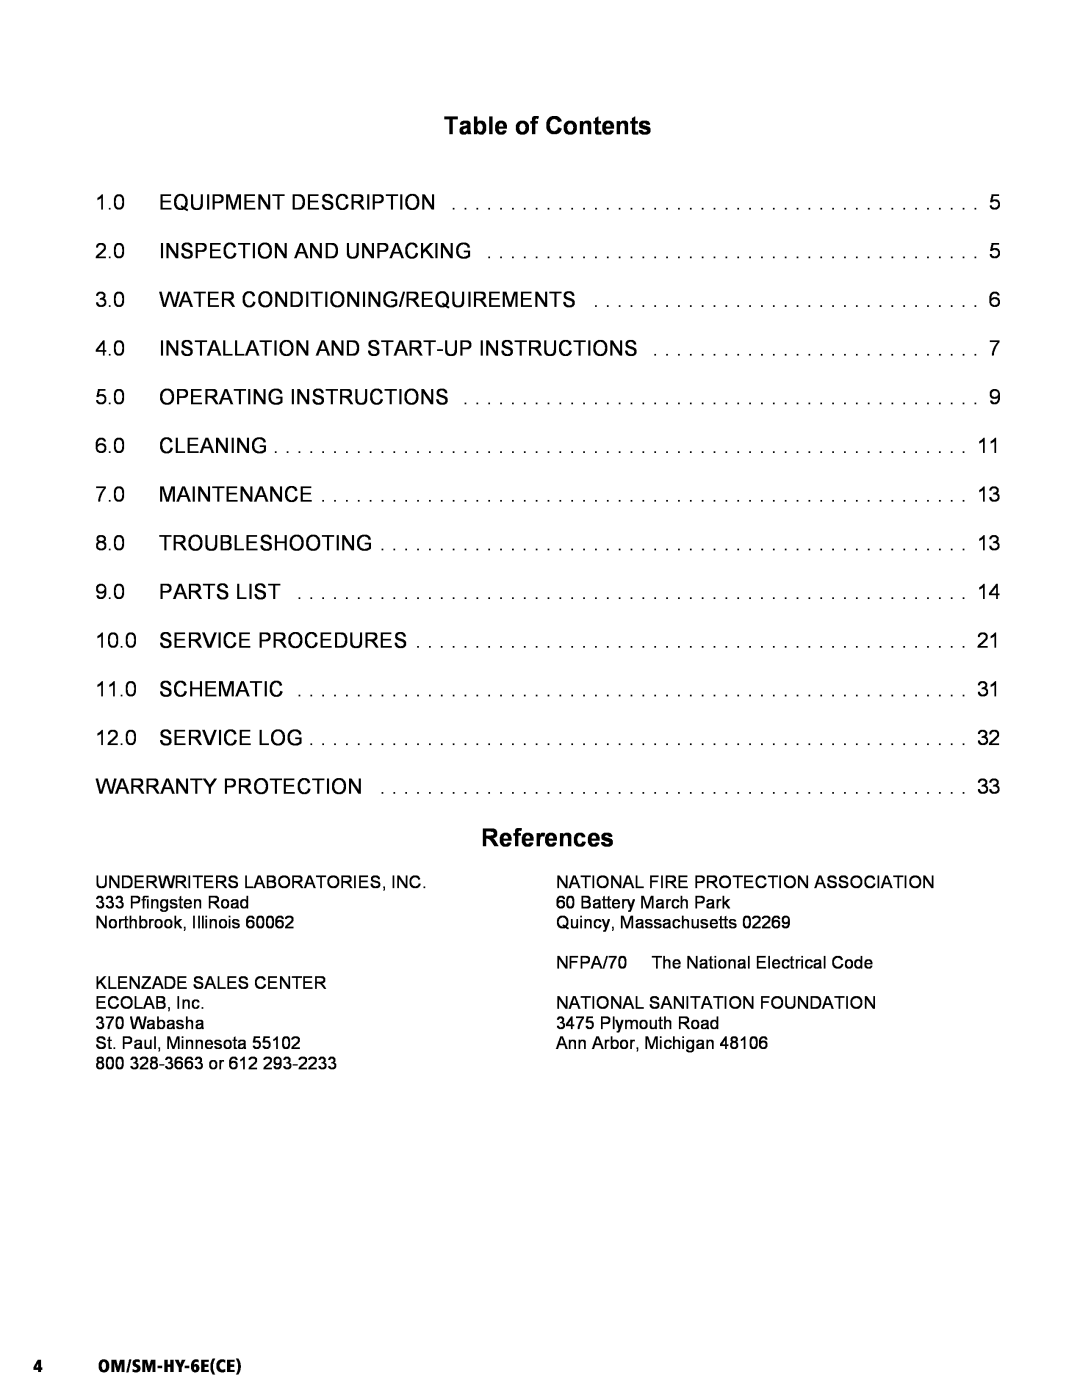 Unified Brands HY-6E(CE) service manual Table of Contents, References 